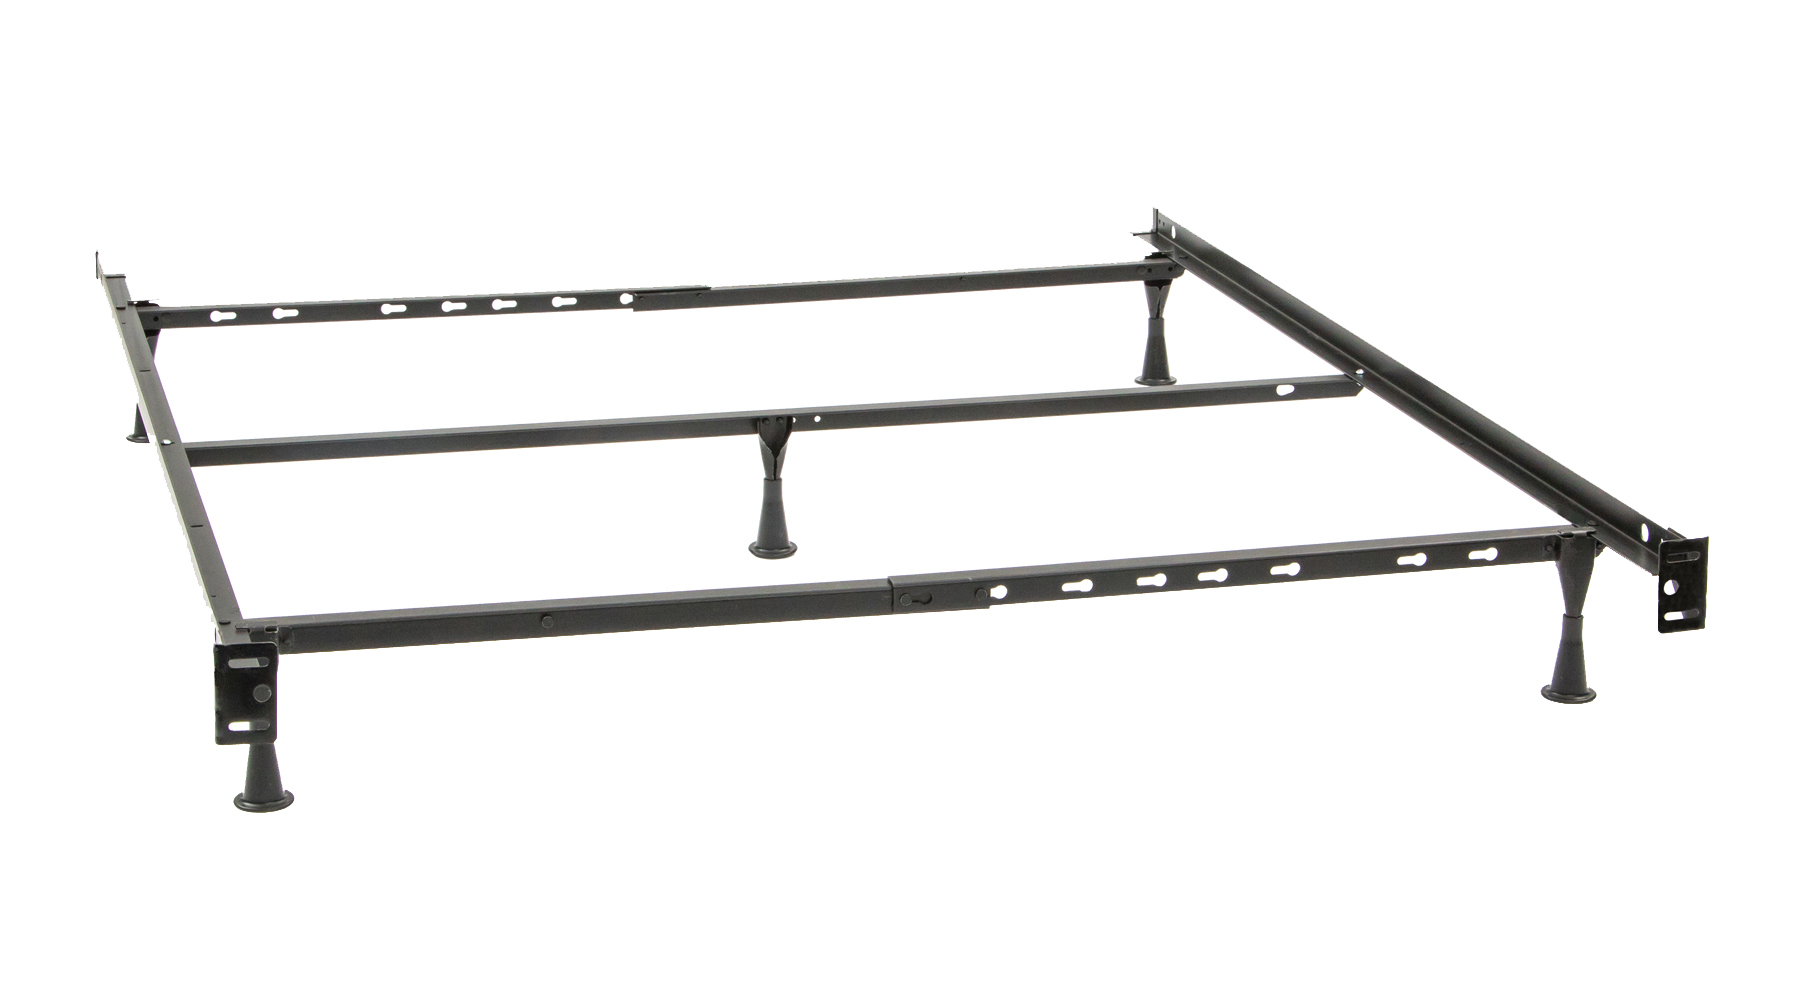 Dreams Inc Classic Heavy Duty, Metal Bed Frame With Adjustable Legs